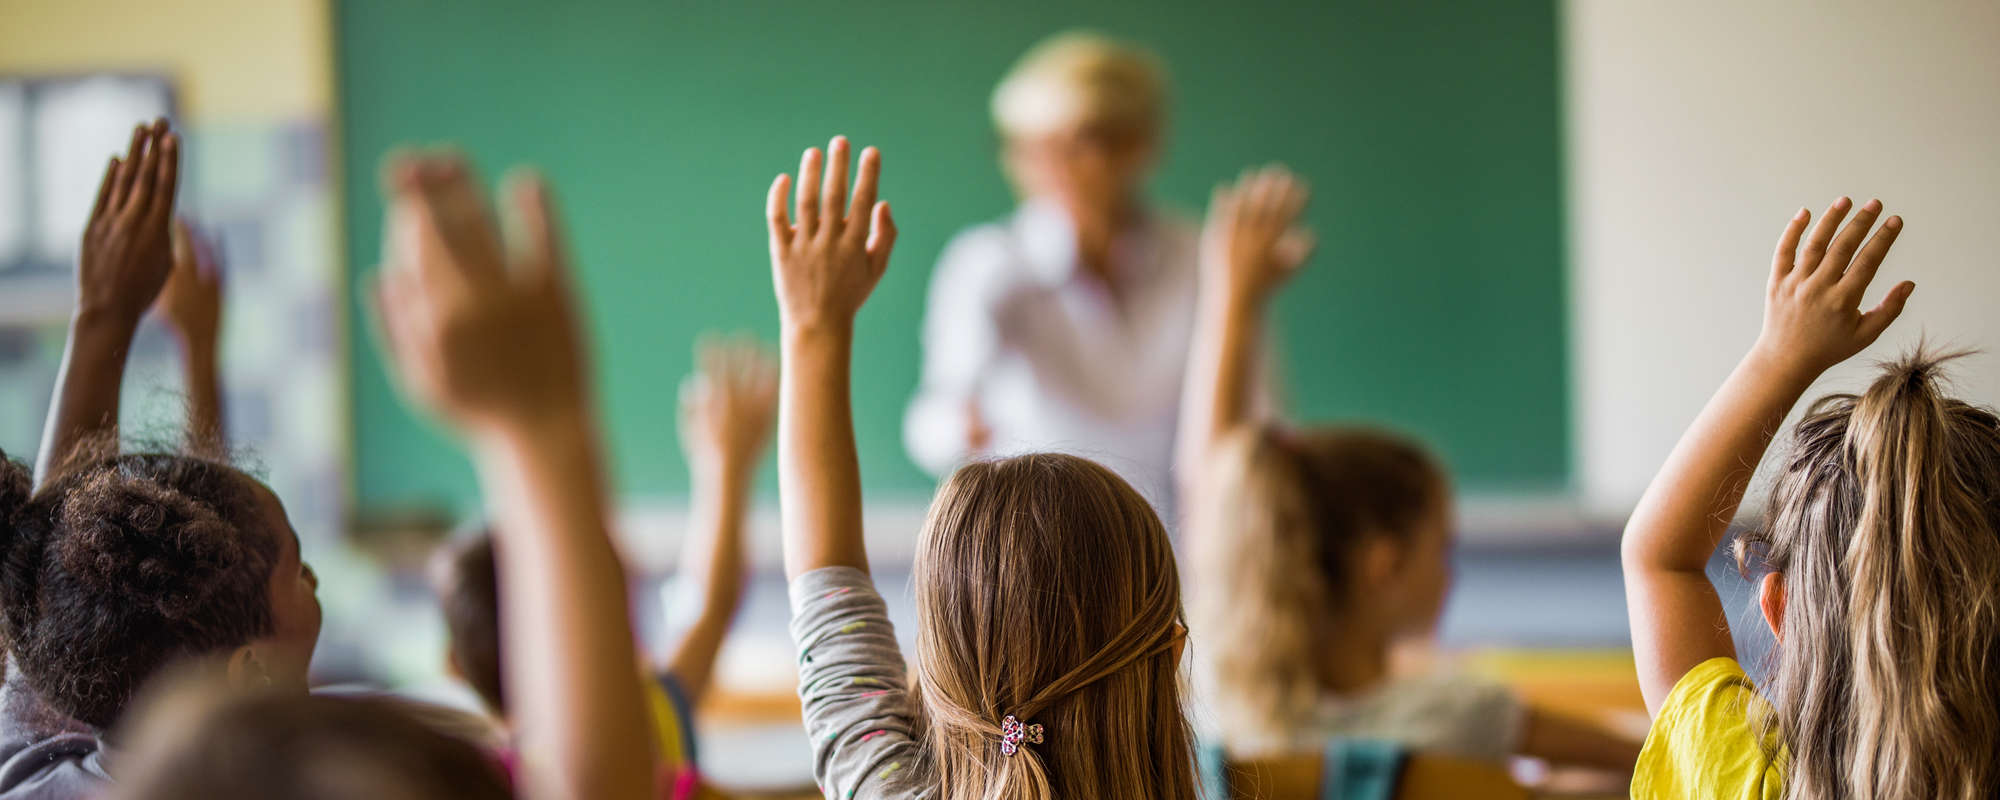 Canadian schools themed stock photo - students with raised hands facing a teacher in front of the class.